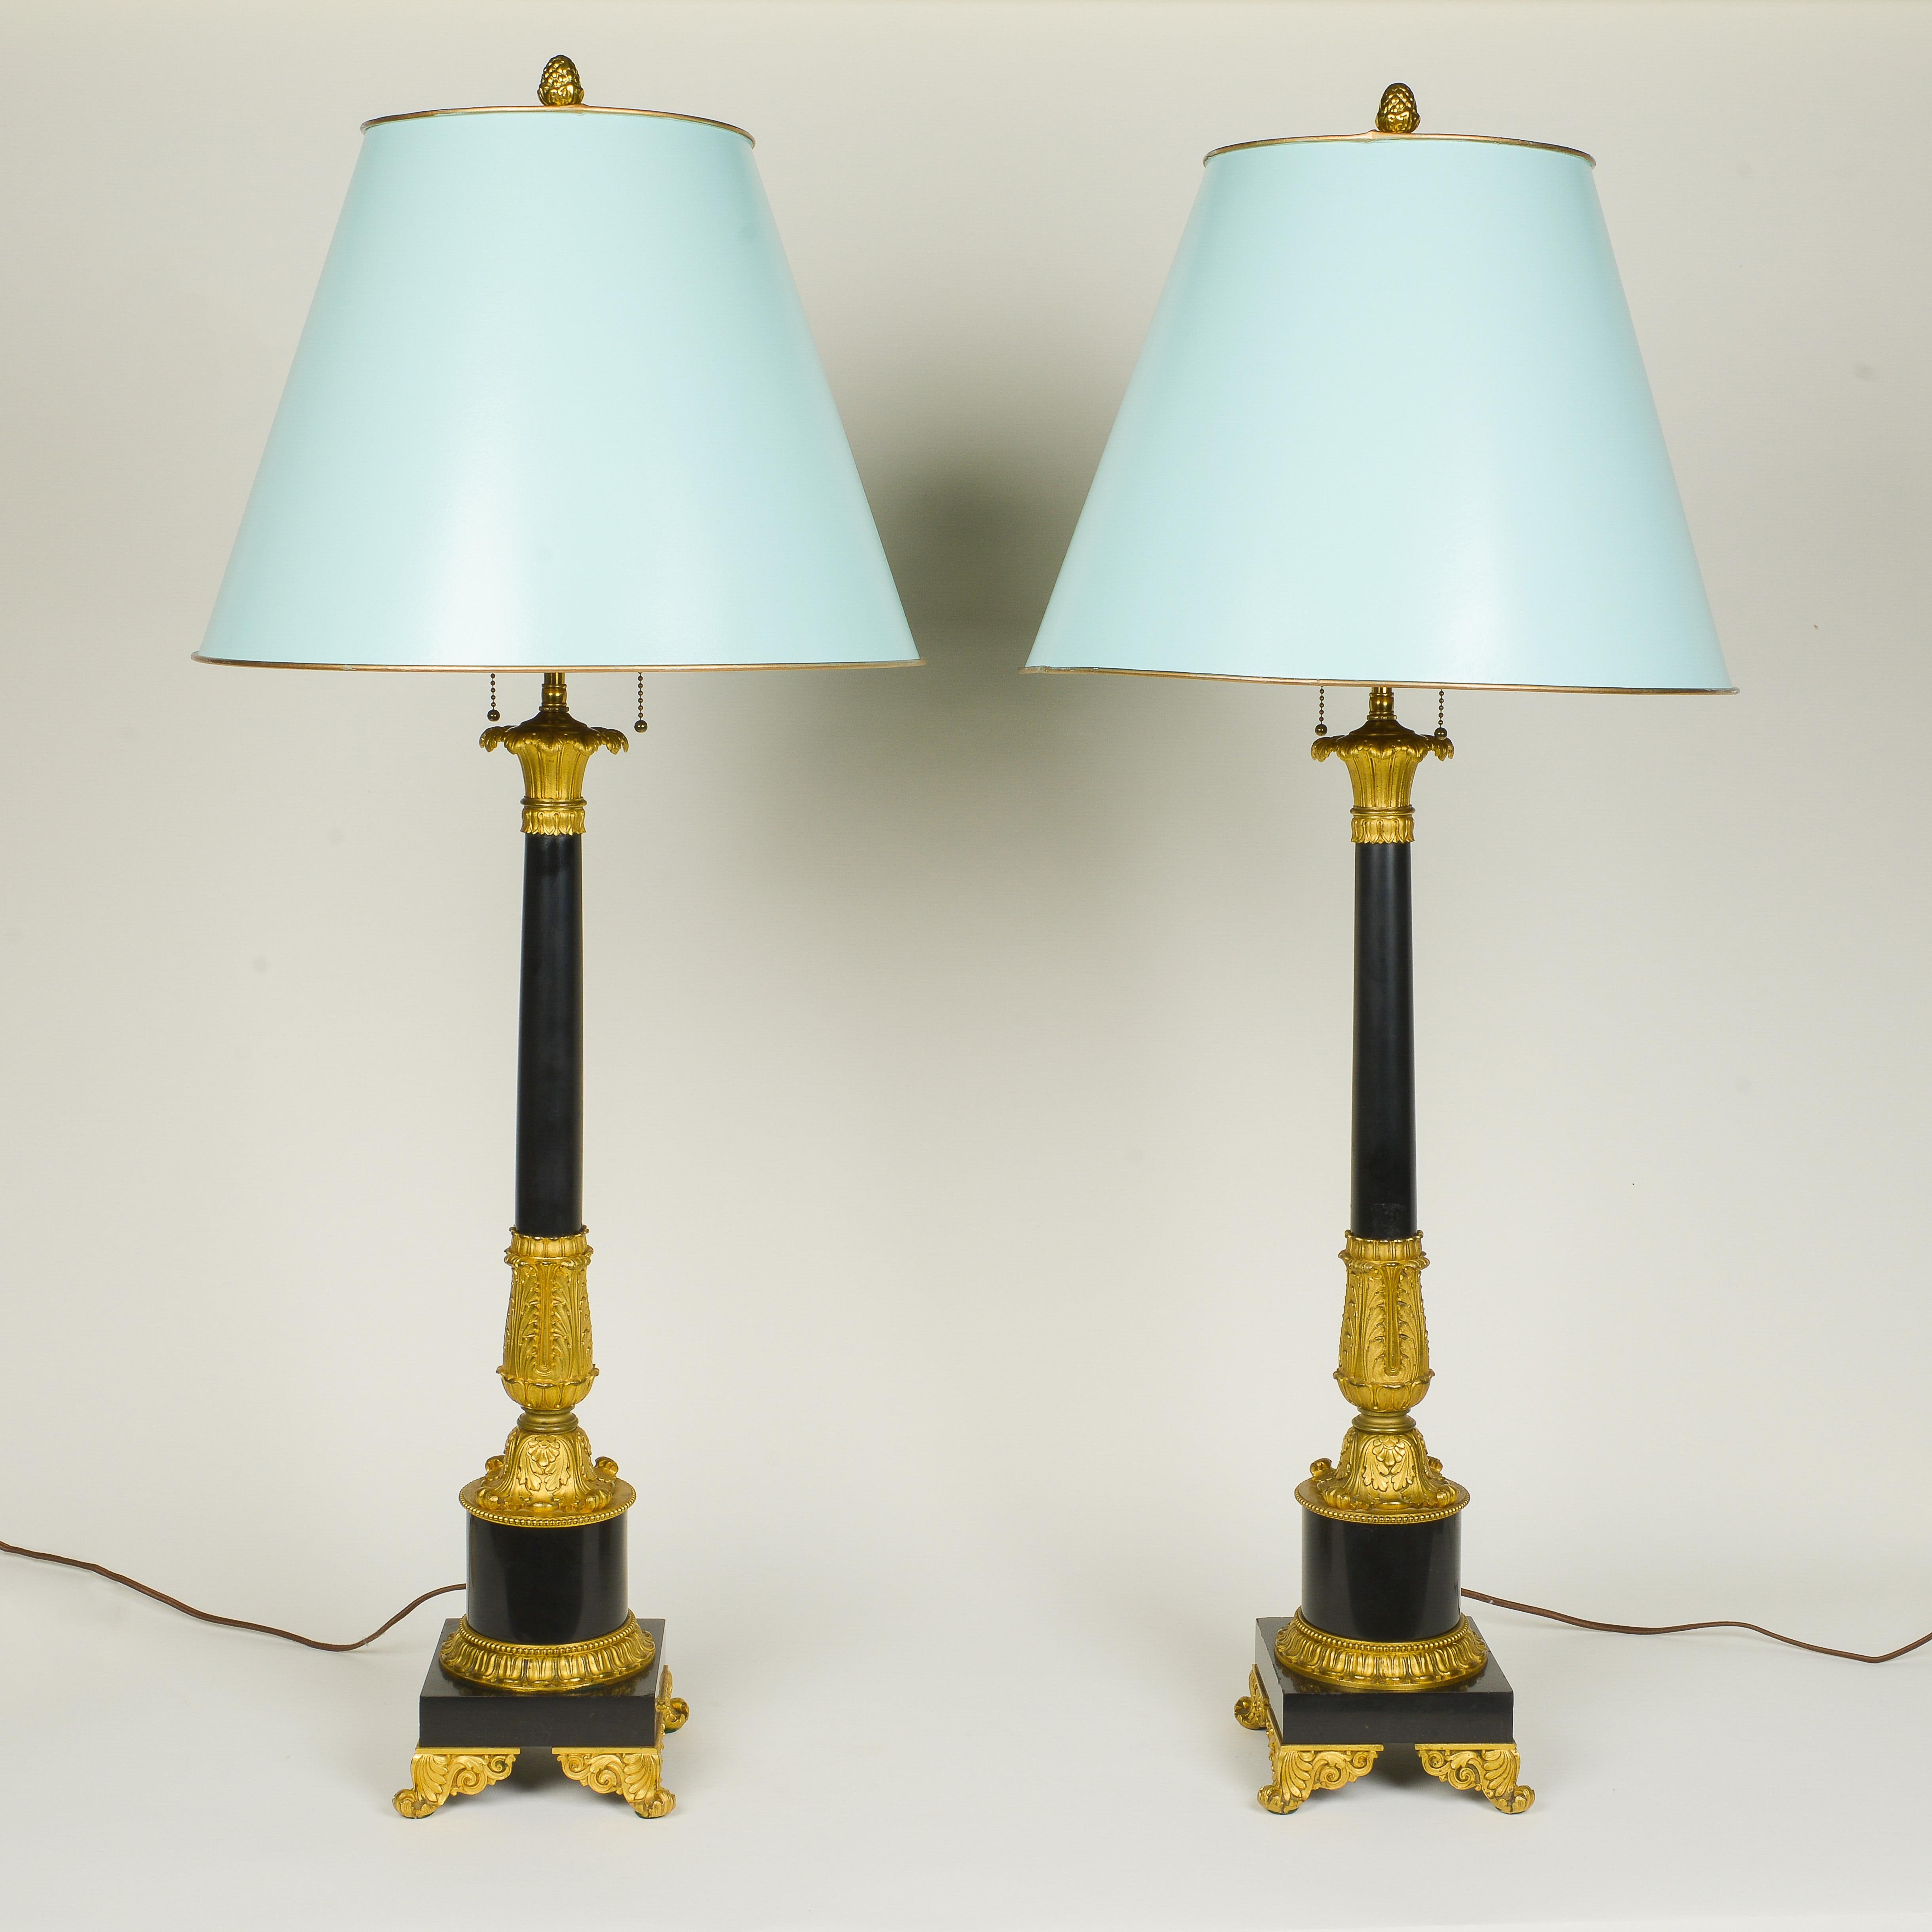 Each candleholder of columnar form surmounted with ormolu stiff-leaf capitals and with acanthus-wrapped base, on pedestal bases with outswept scrolling feet. Fitted with two brass bulb sockets. Adjustable. Later mounded as a lamps. With duck blue